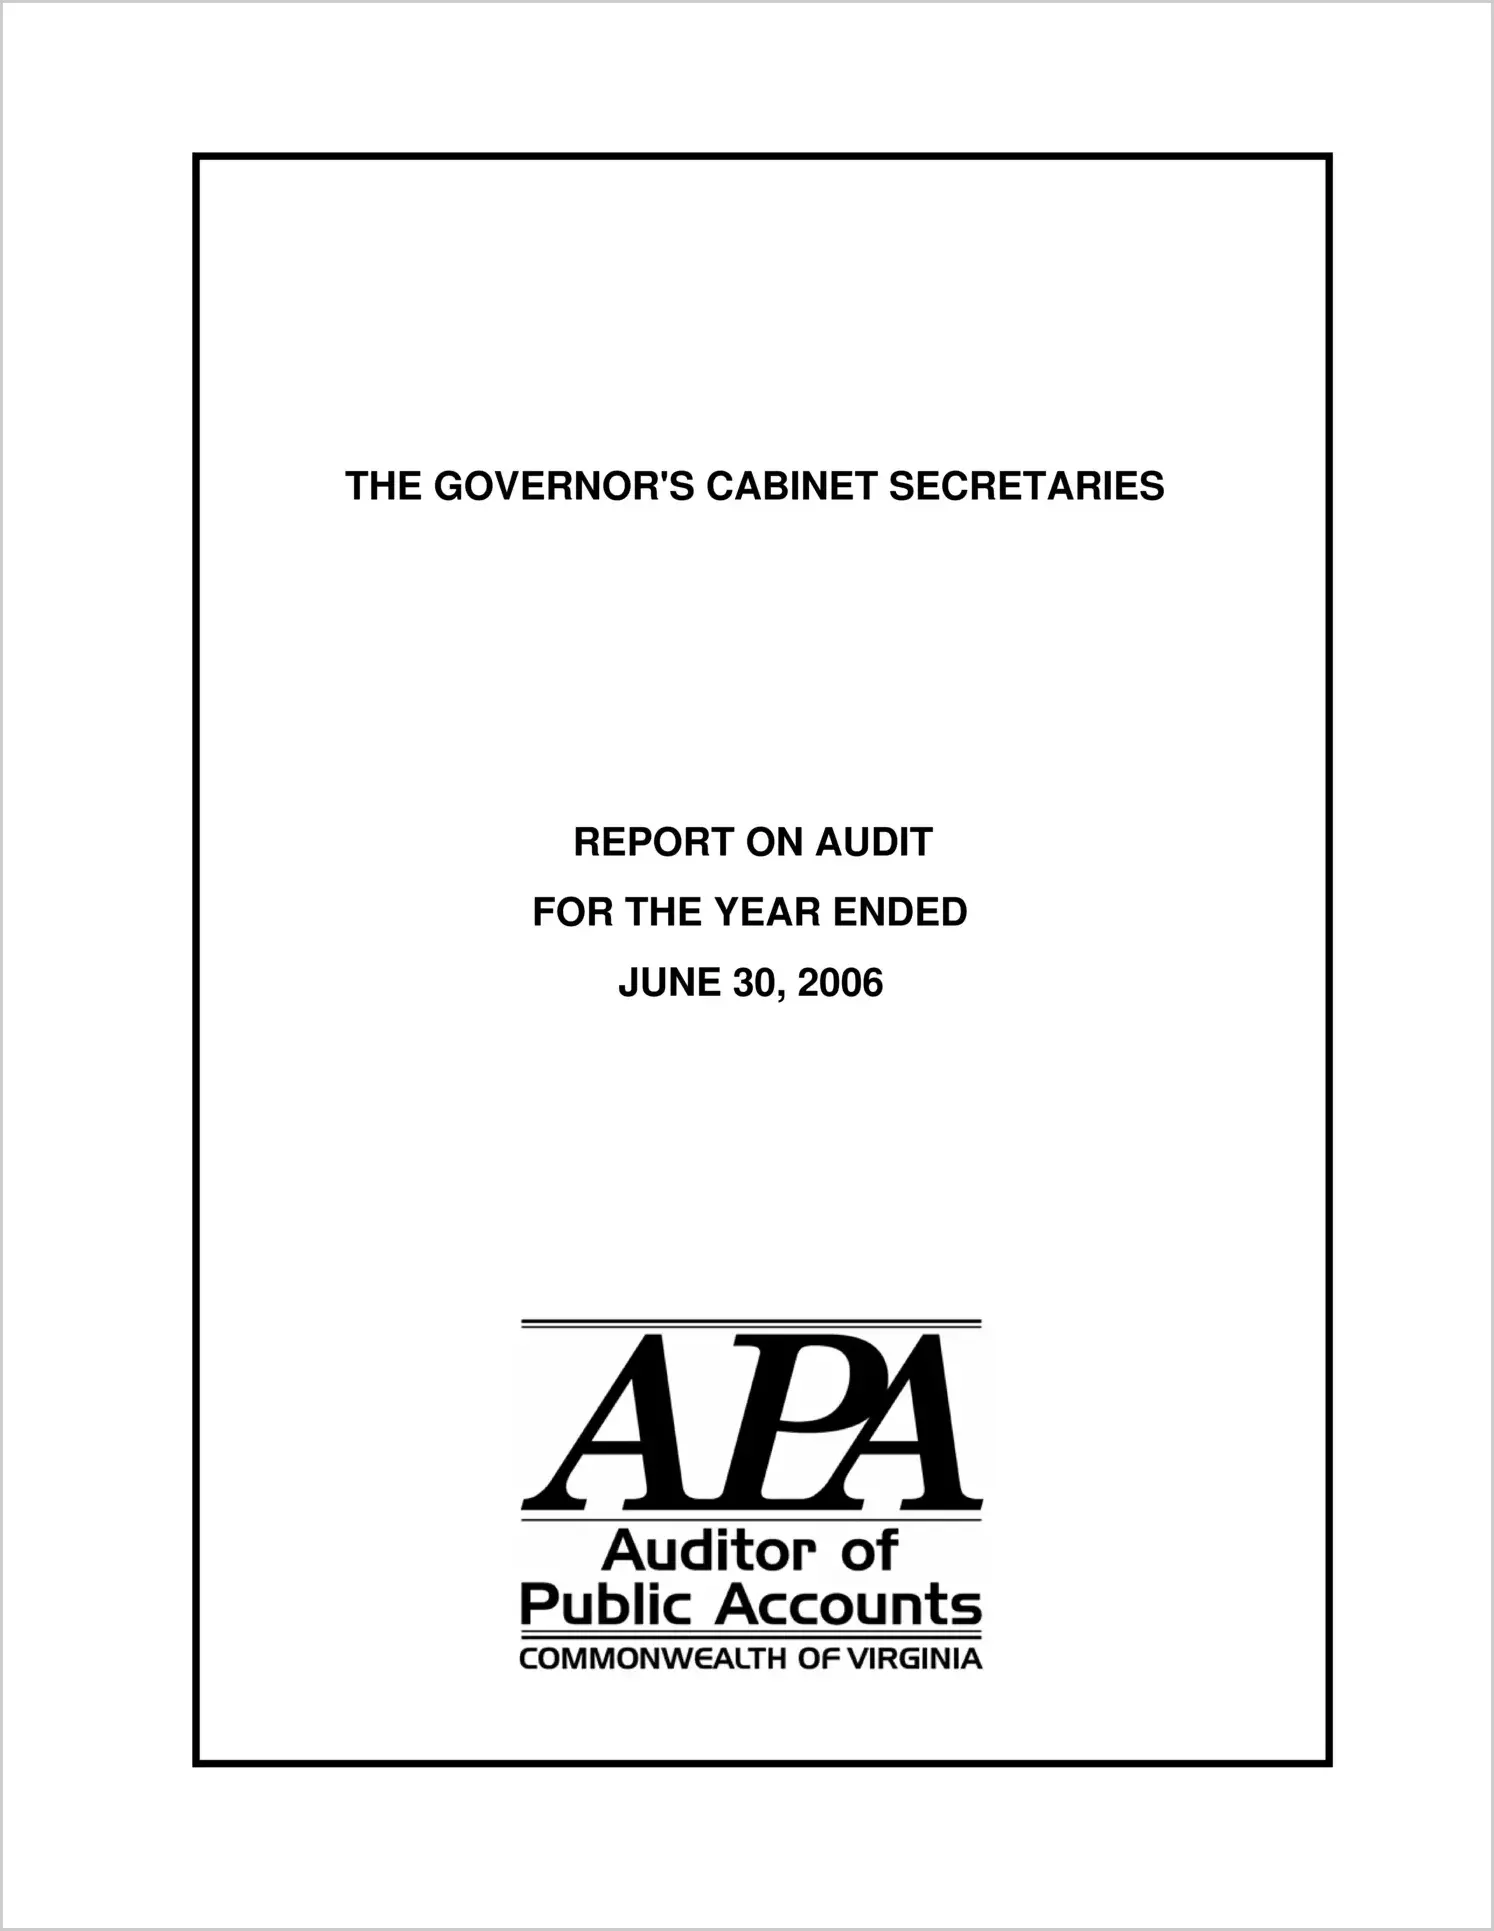 Governor? Cabinet Secretaries for the year ended June 30, 2006